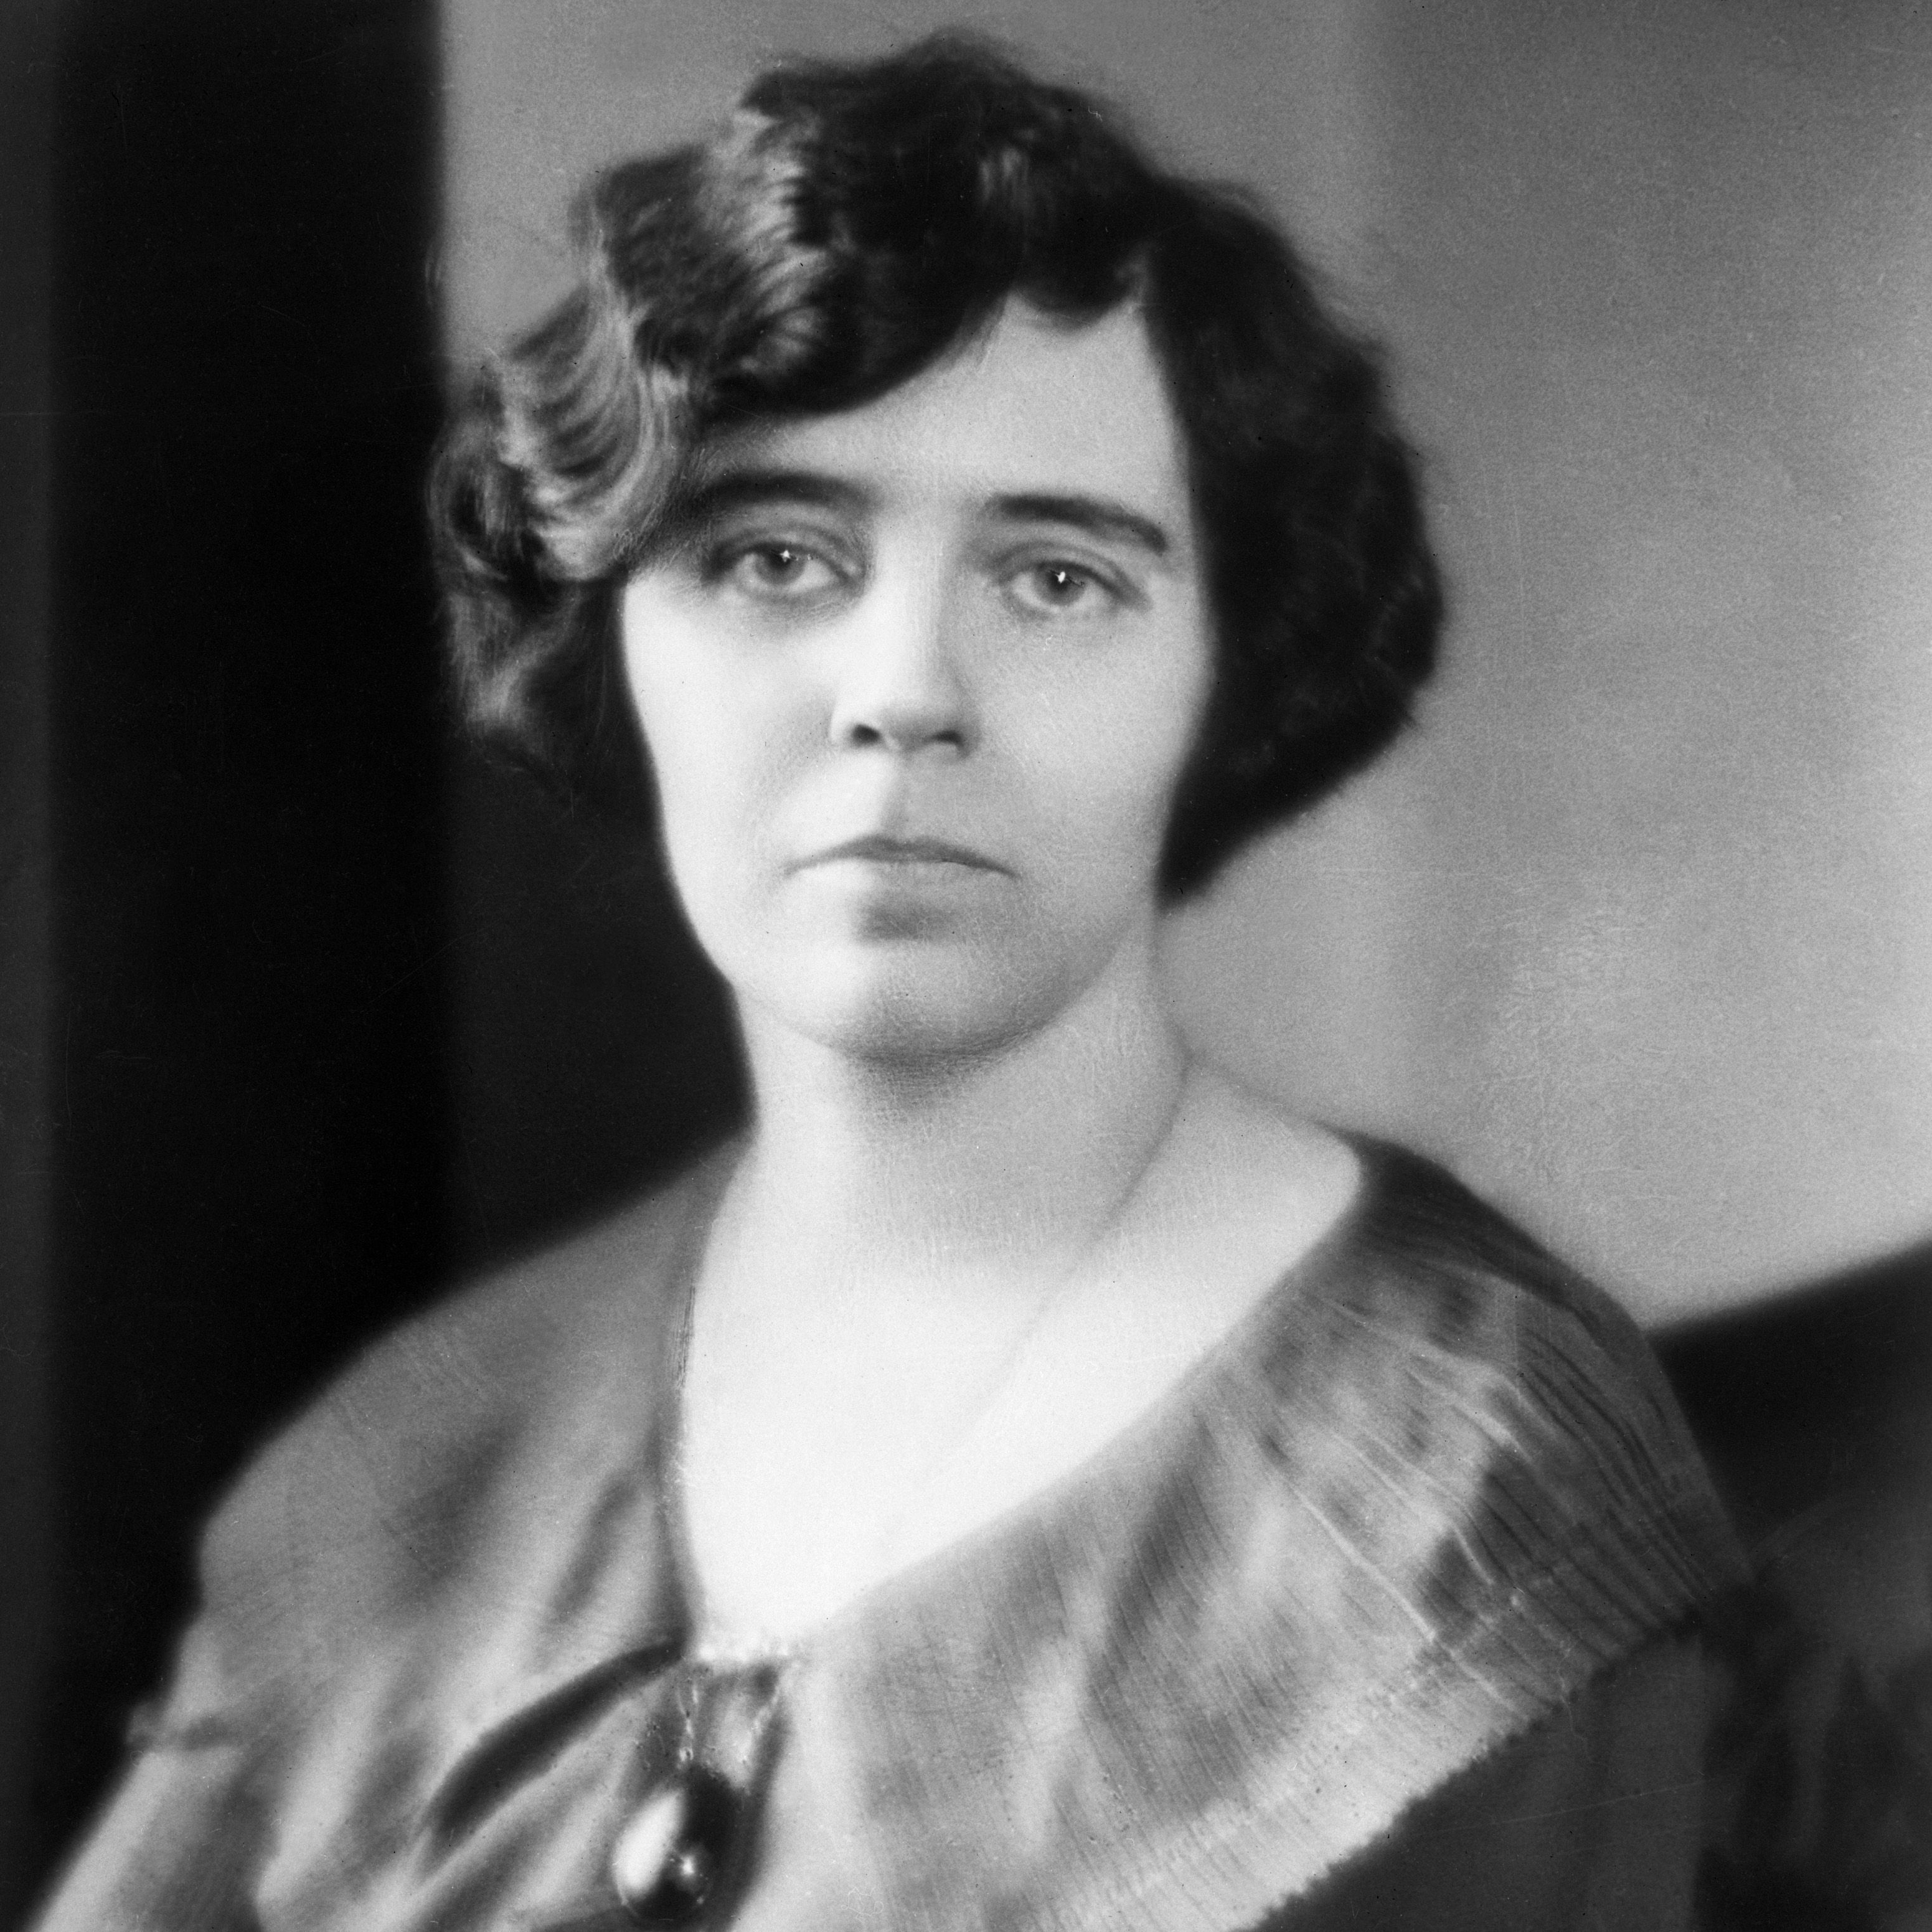 Molly Brown, Feminist History and the “unsinkable” RMS Titanic